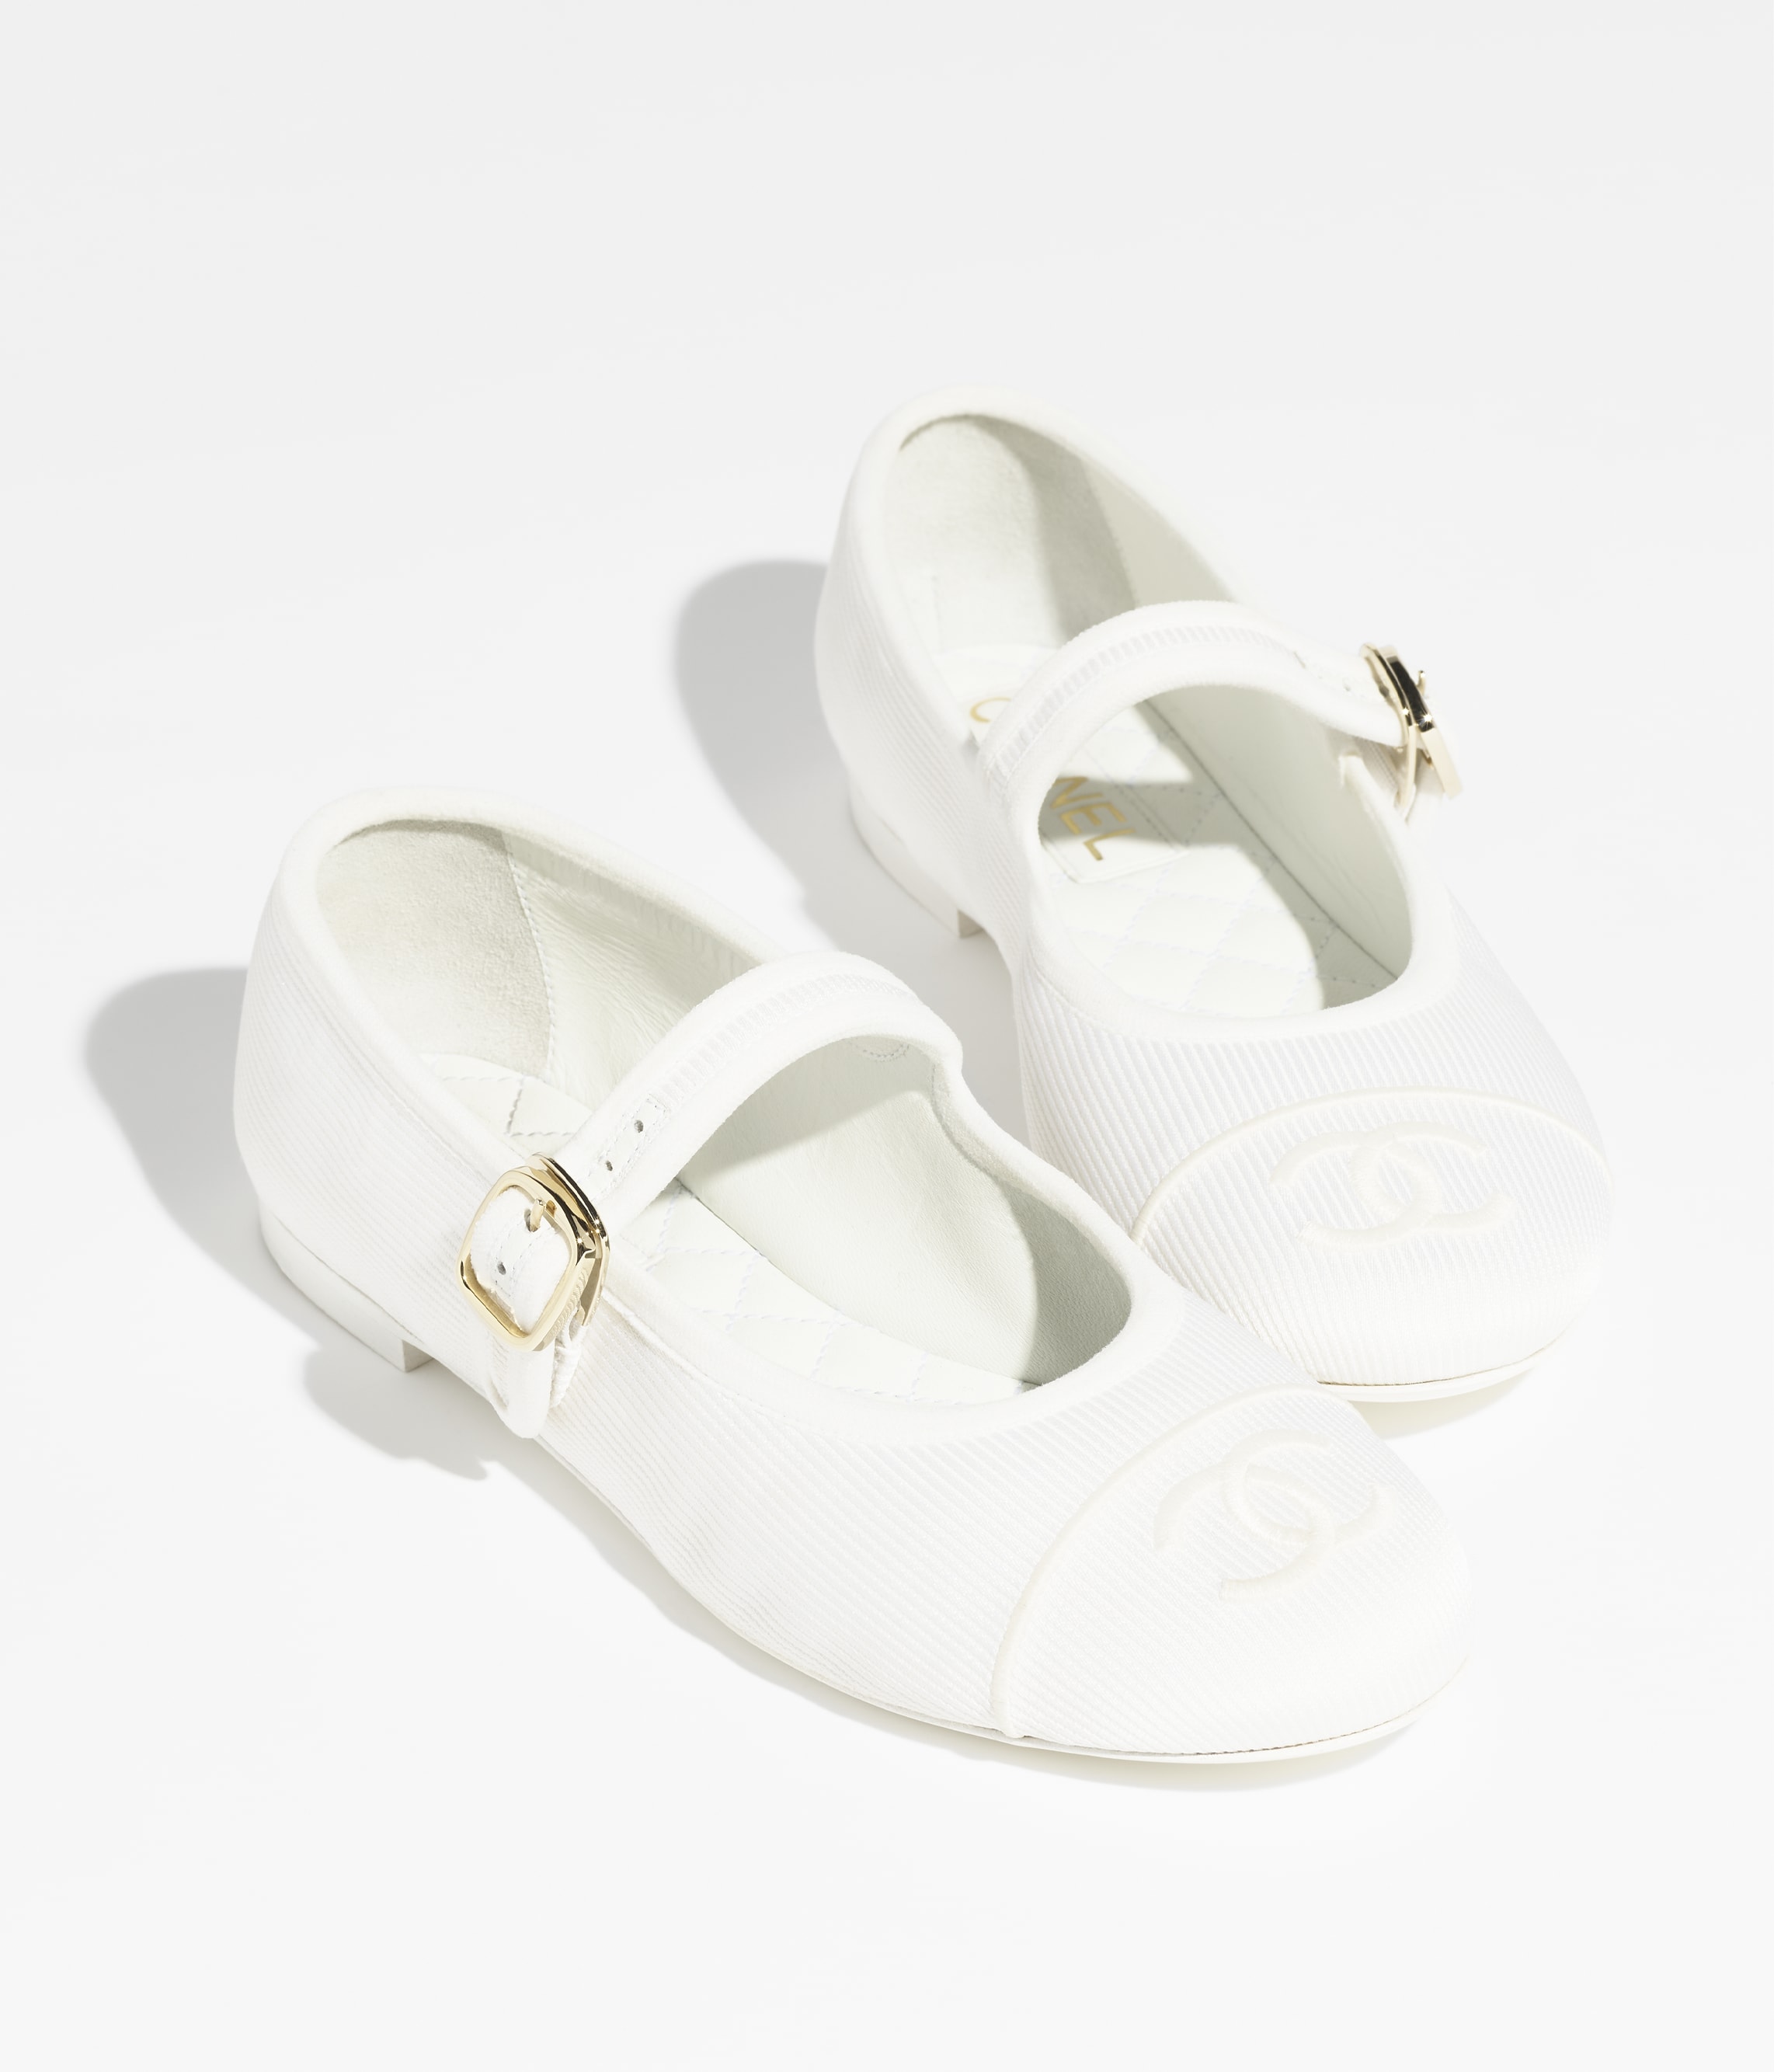 Chanel, Cotton Mary Janes